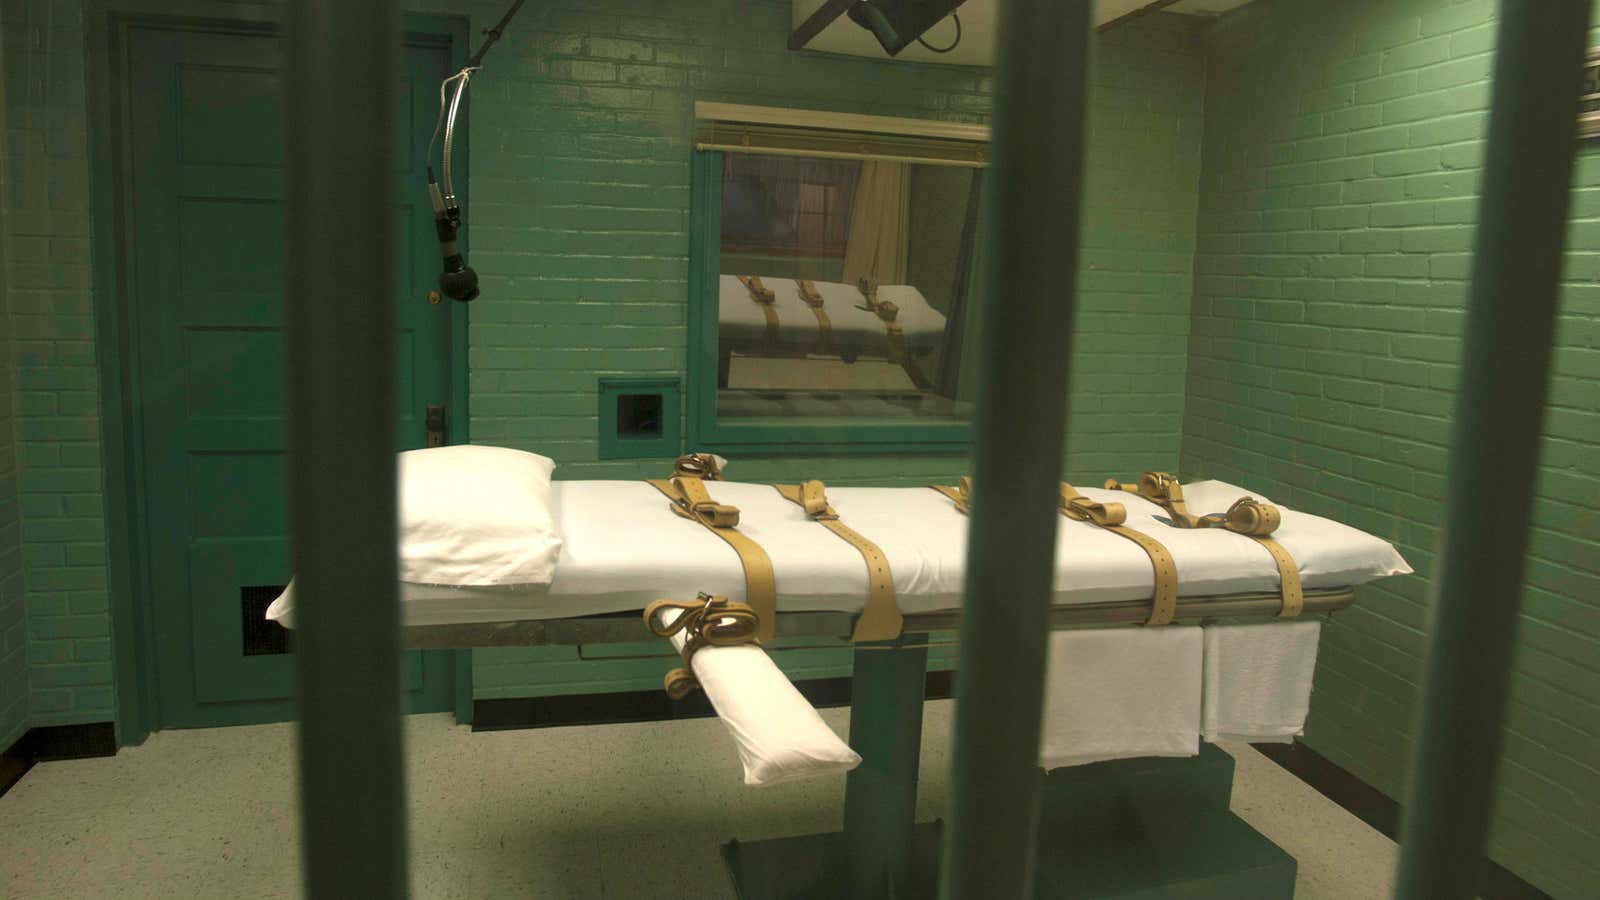 One of the busiest death chambers in the US is fine-tuning its executions